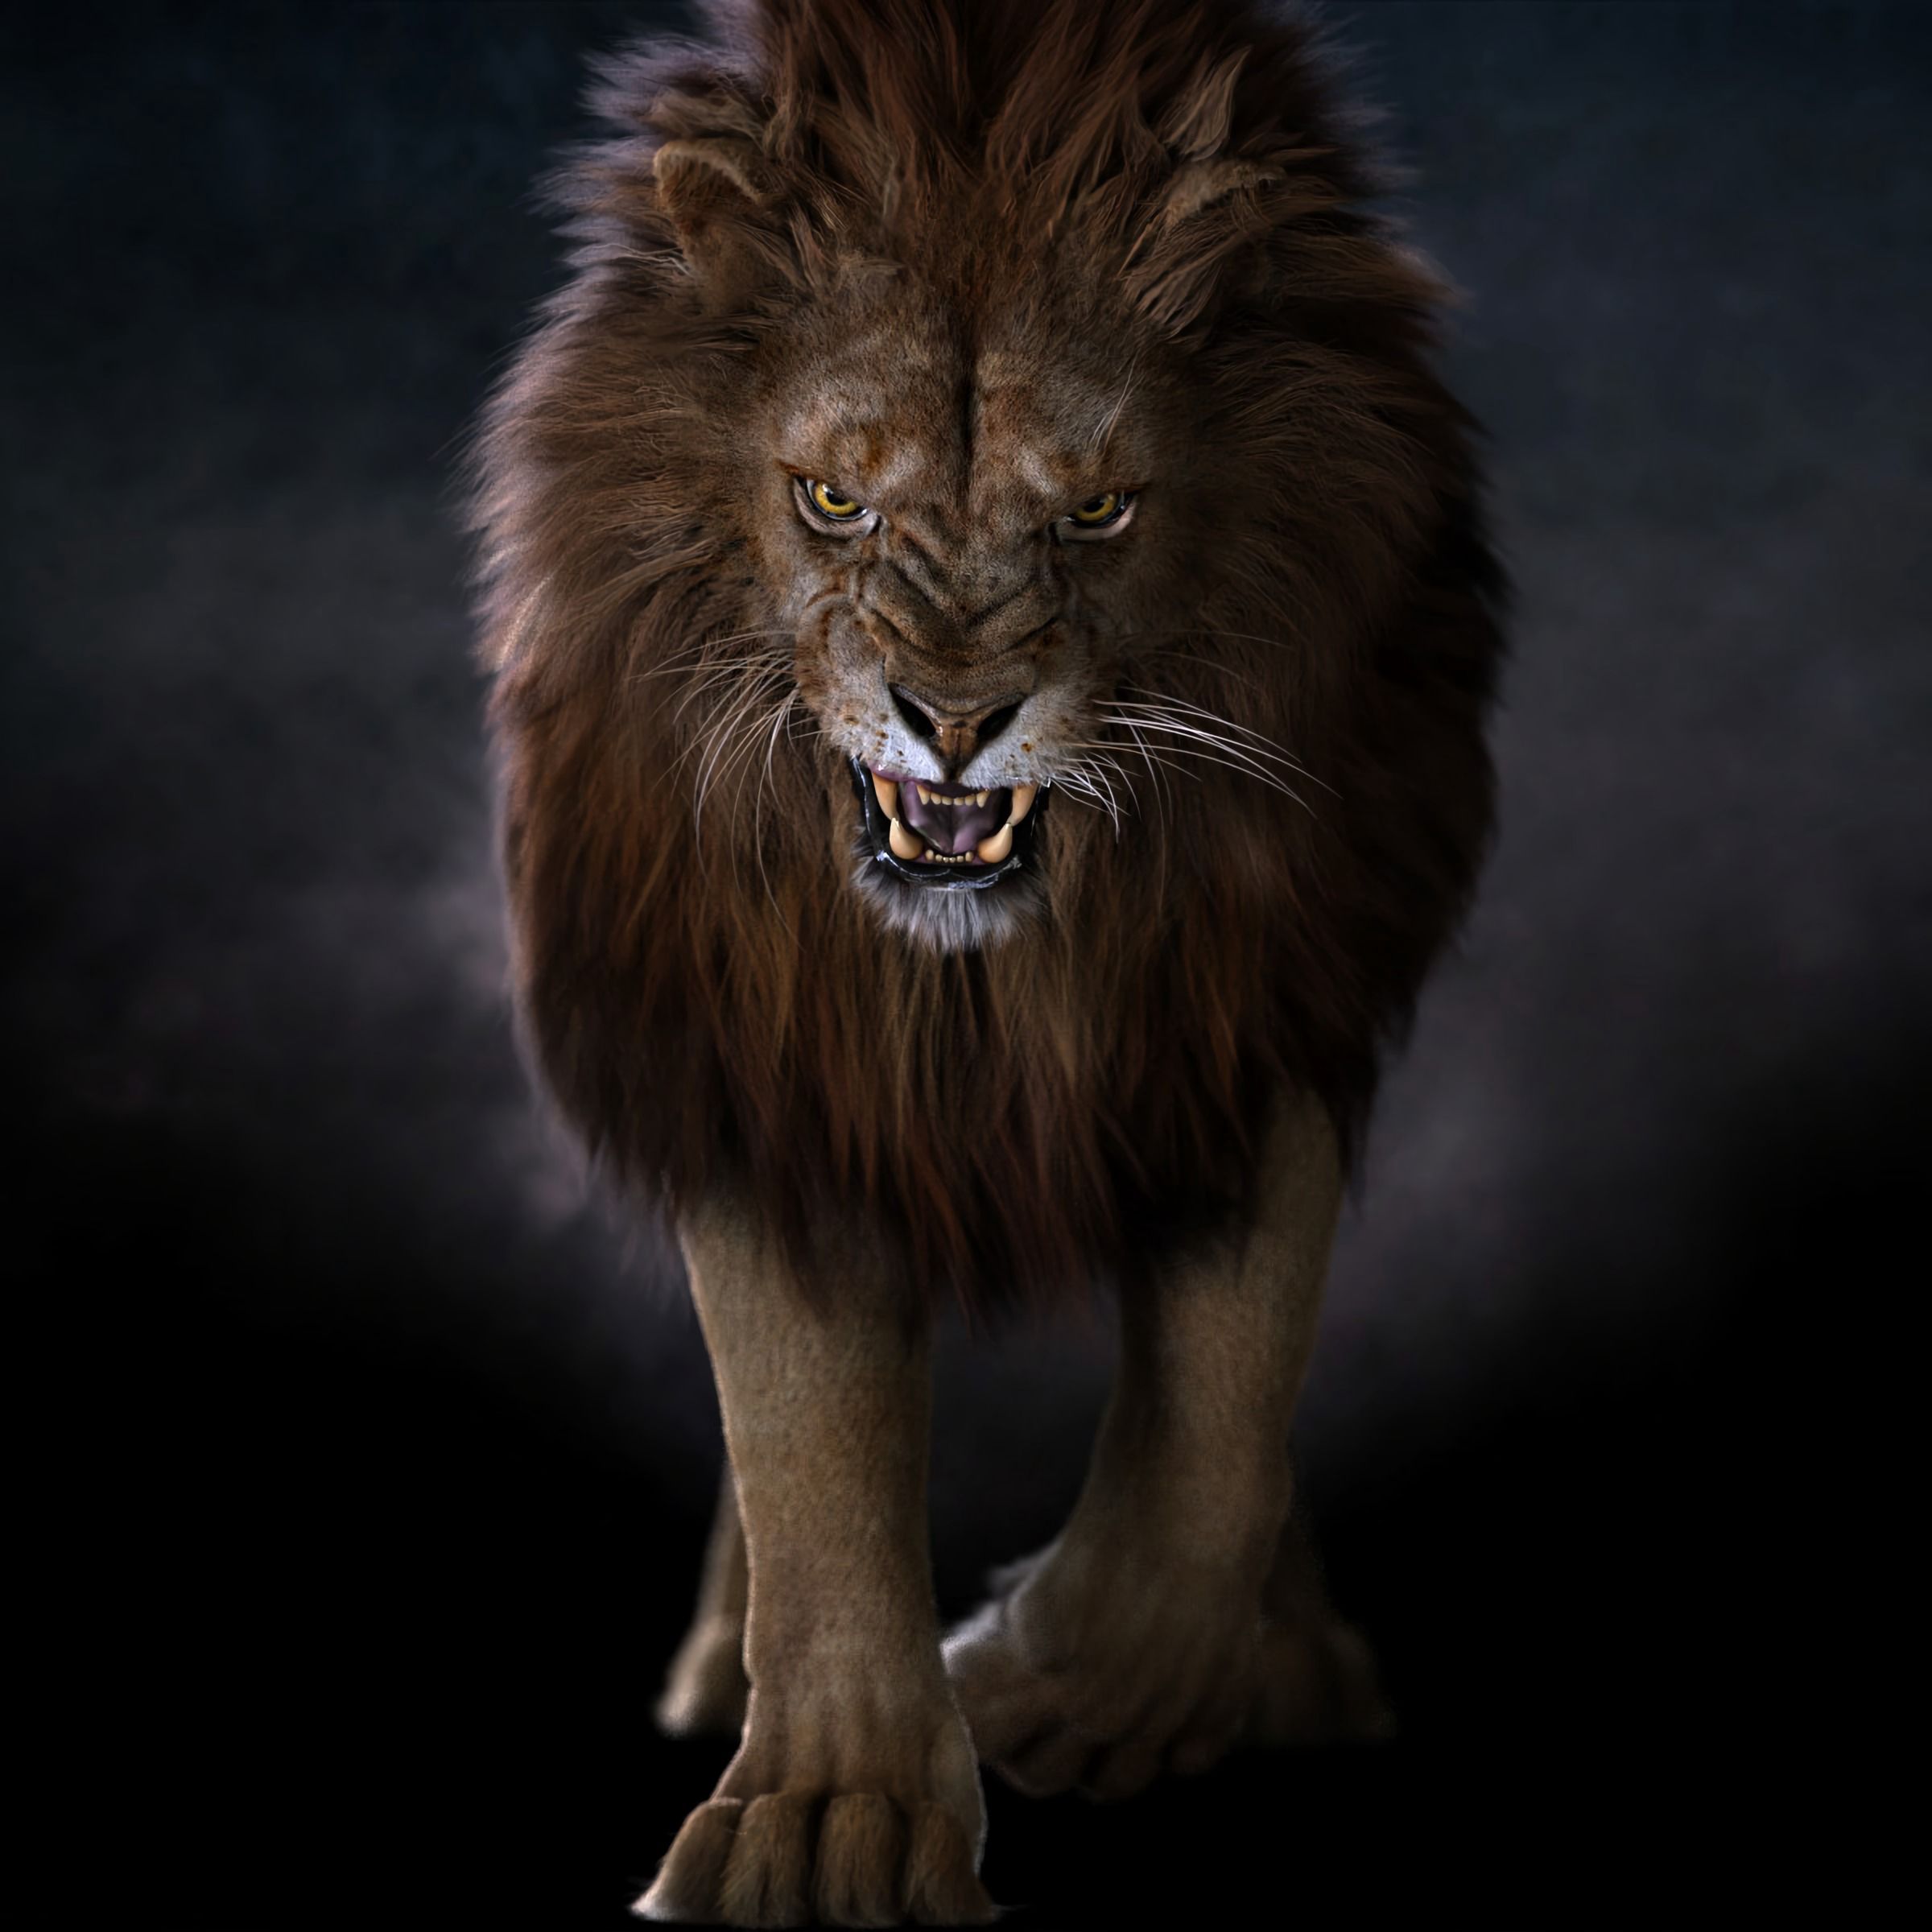 Popular Lion Image for Phone